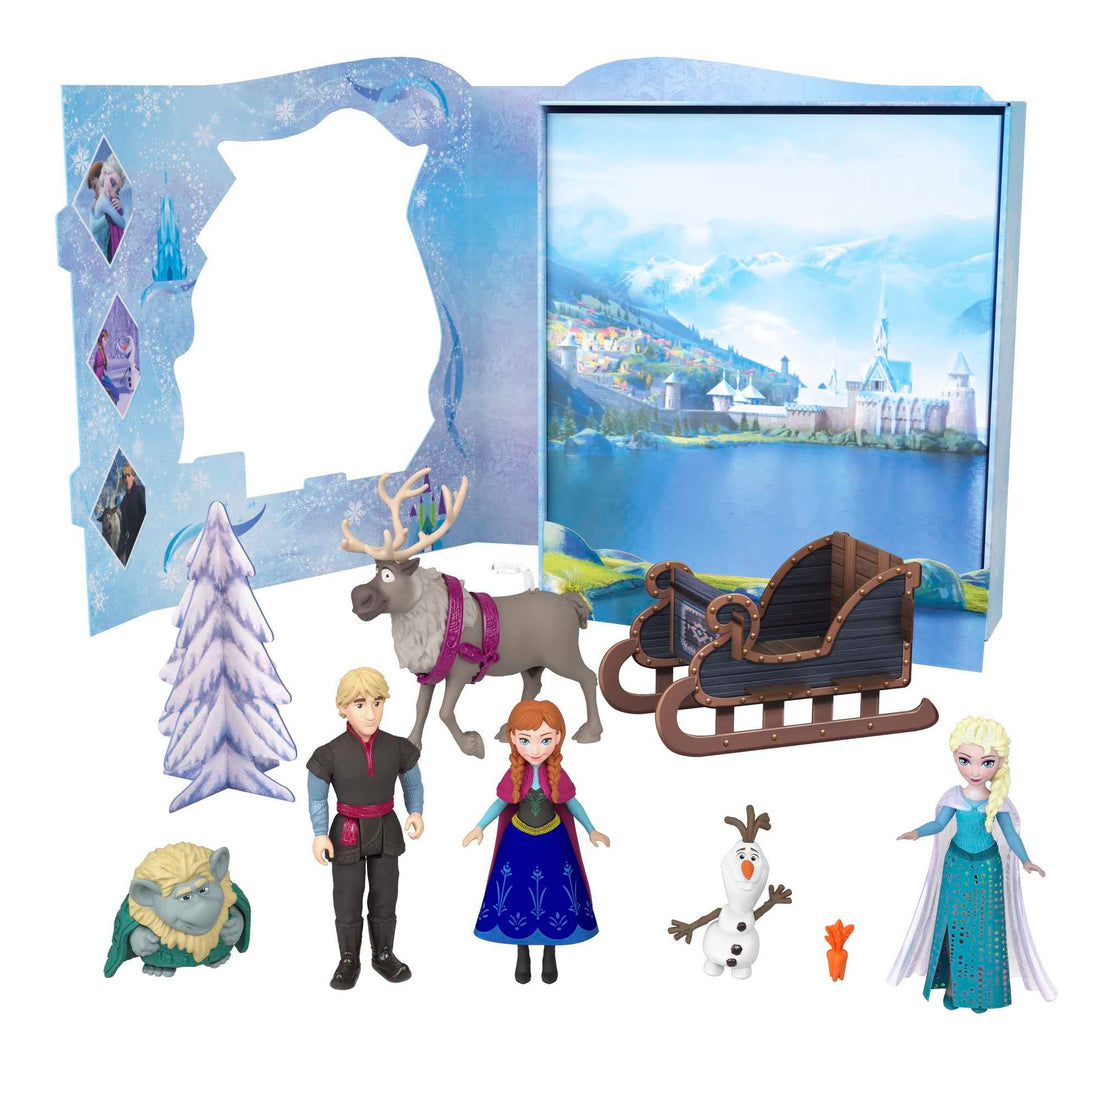 Mattel Disney Frozen Toys, Frozen Story Pack with 6 Key Characters, Small Dolls, Figures and Accessories Inspired by Disney Frozen Movies, Gifts for Kids, HLX04